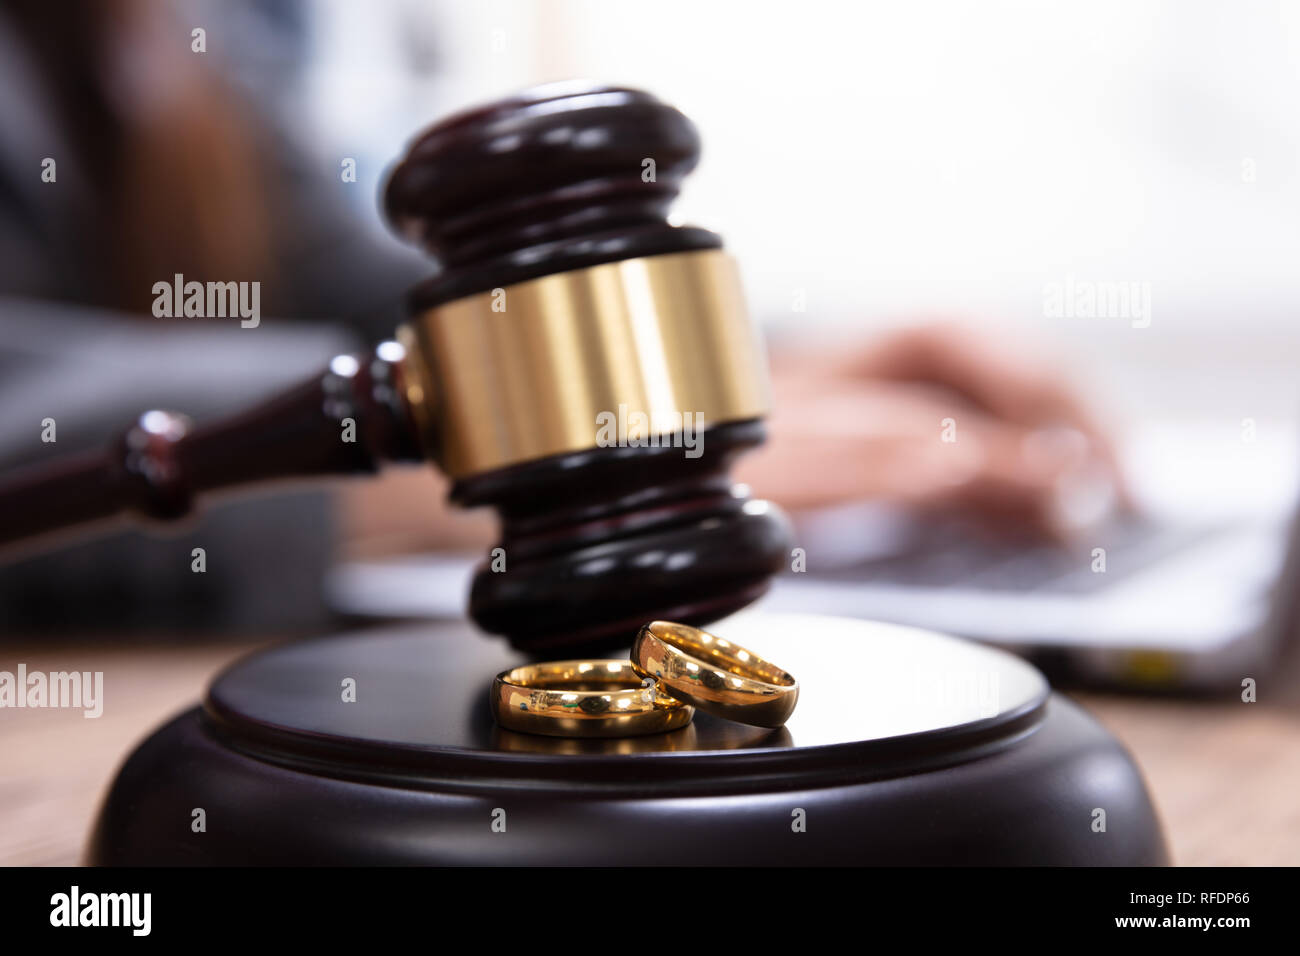 Closeup Of Golden Wedding Rings On Wooden Mallet At Table In Courtroom Stock Photo